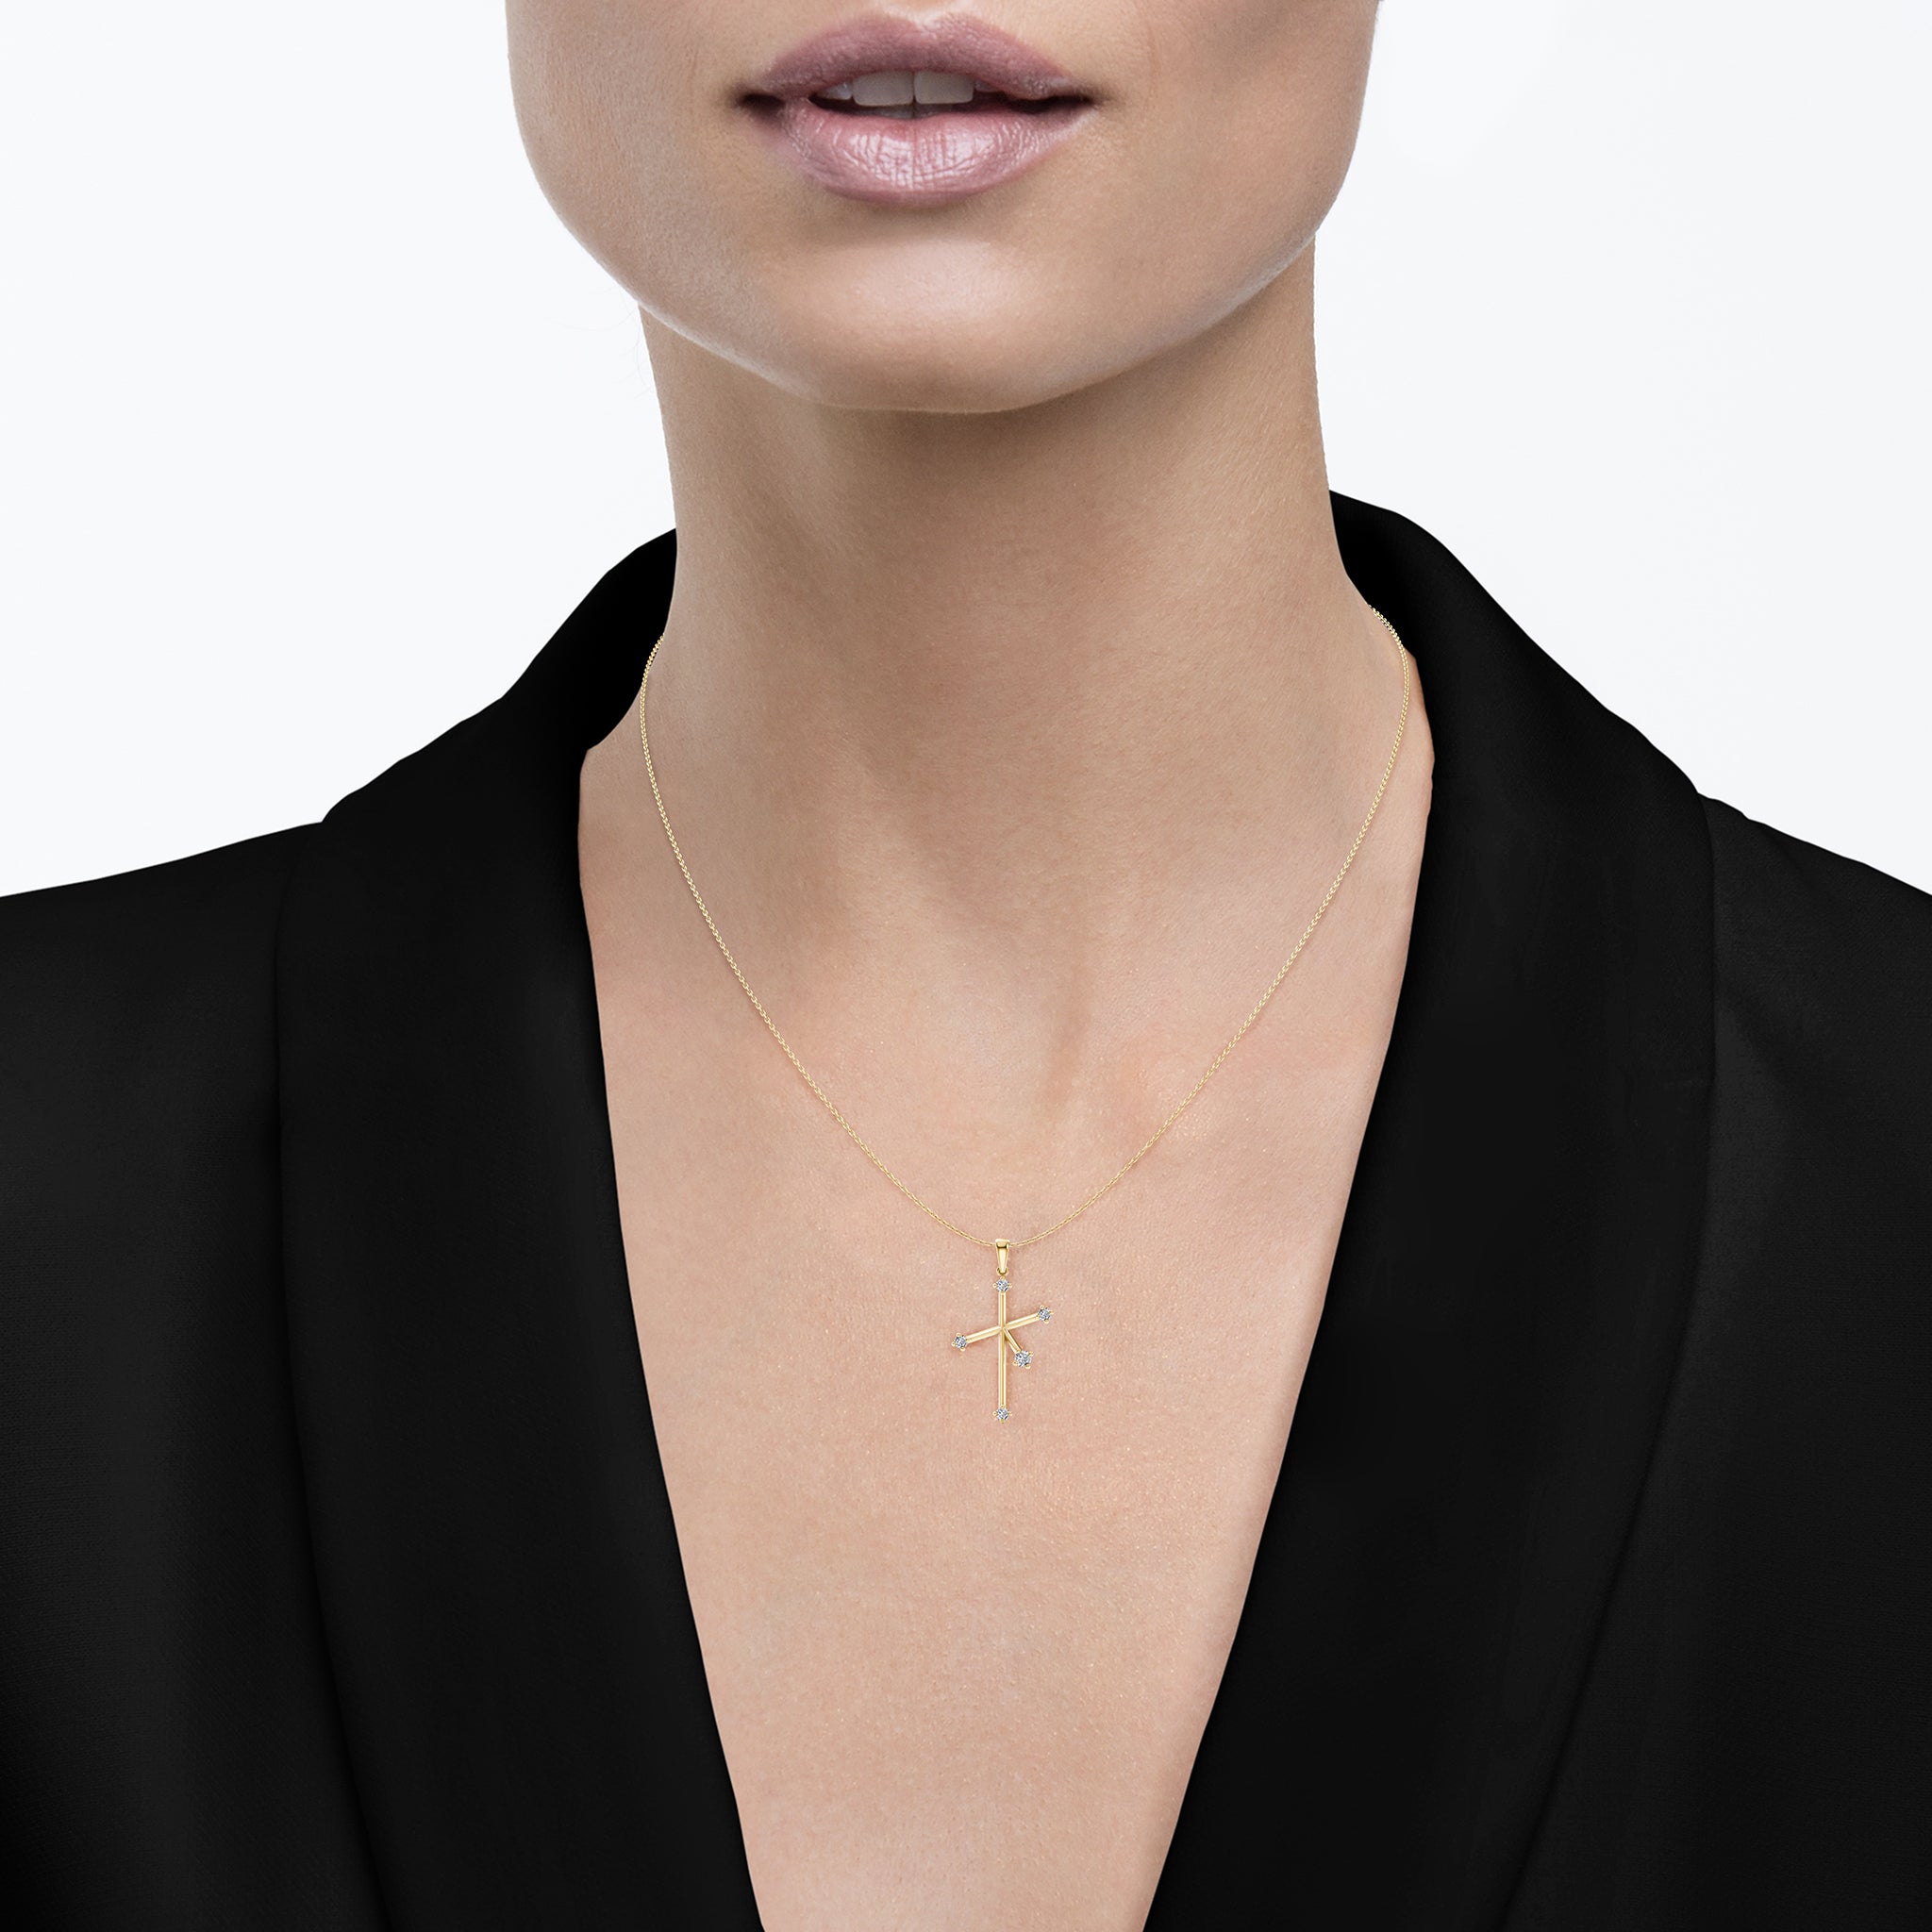 Shimansky - Women Wearing the Southern Cross Large Diamond Pendant Crafted in 14K Yellow Gold